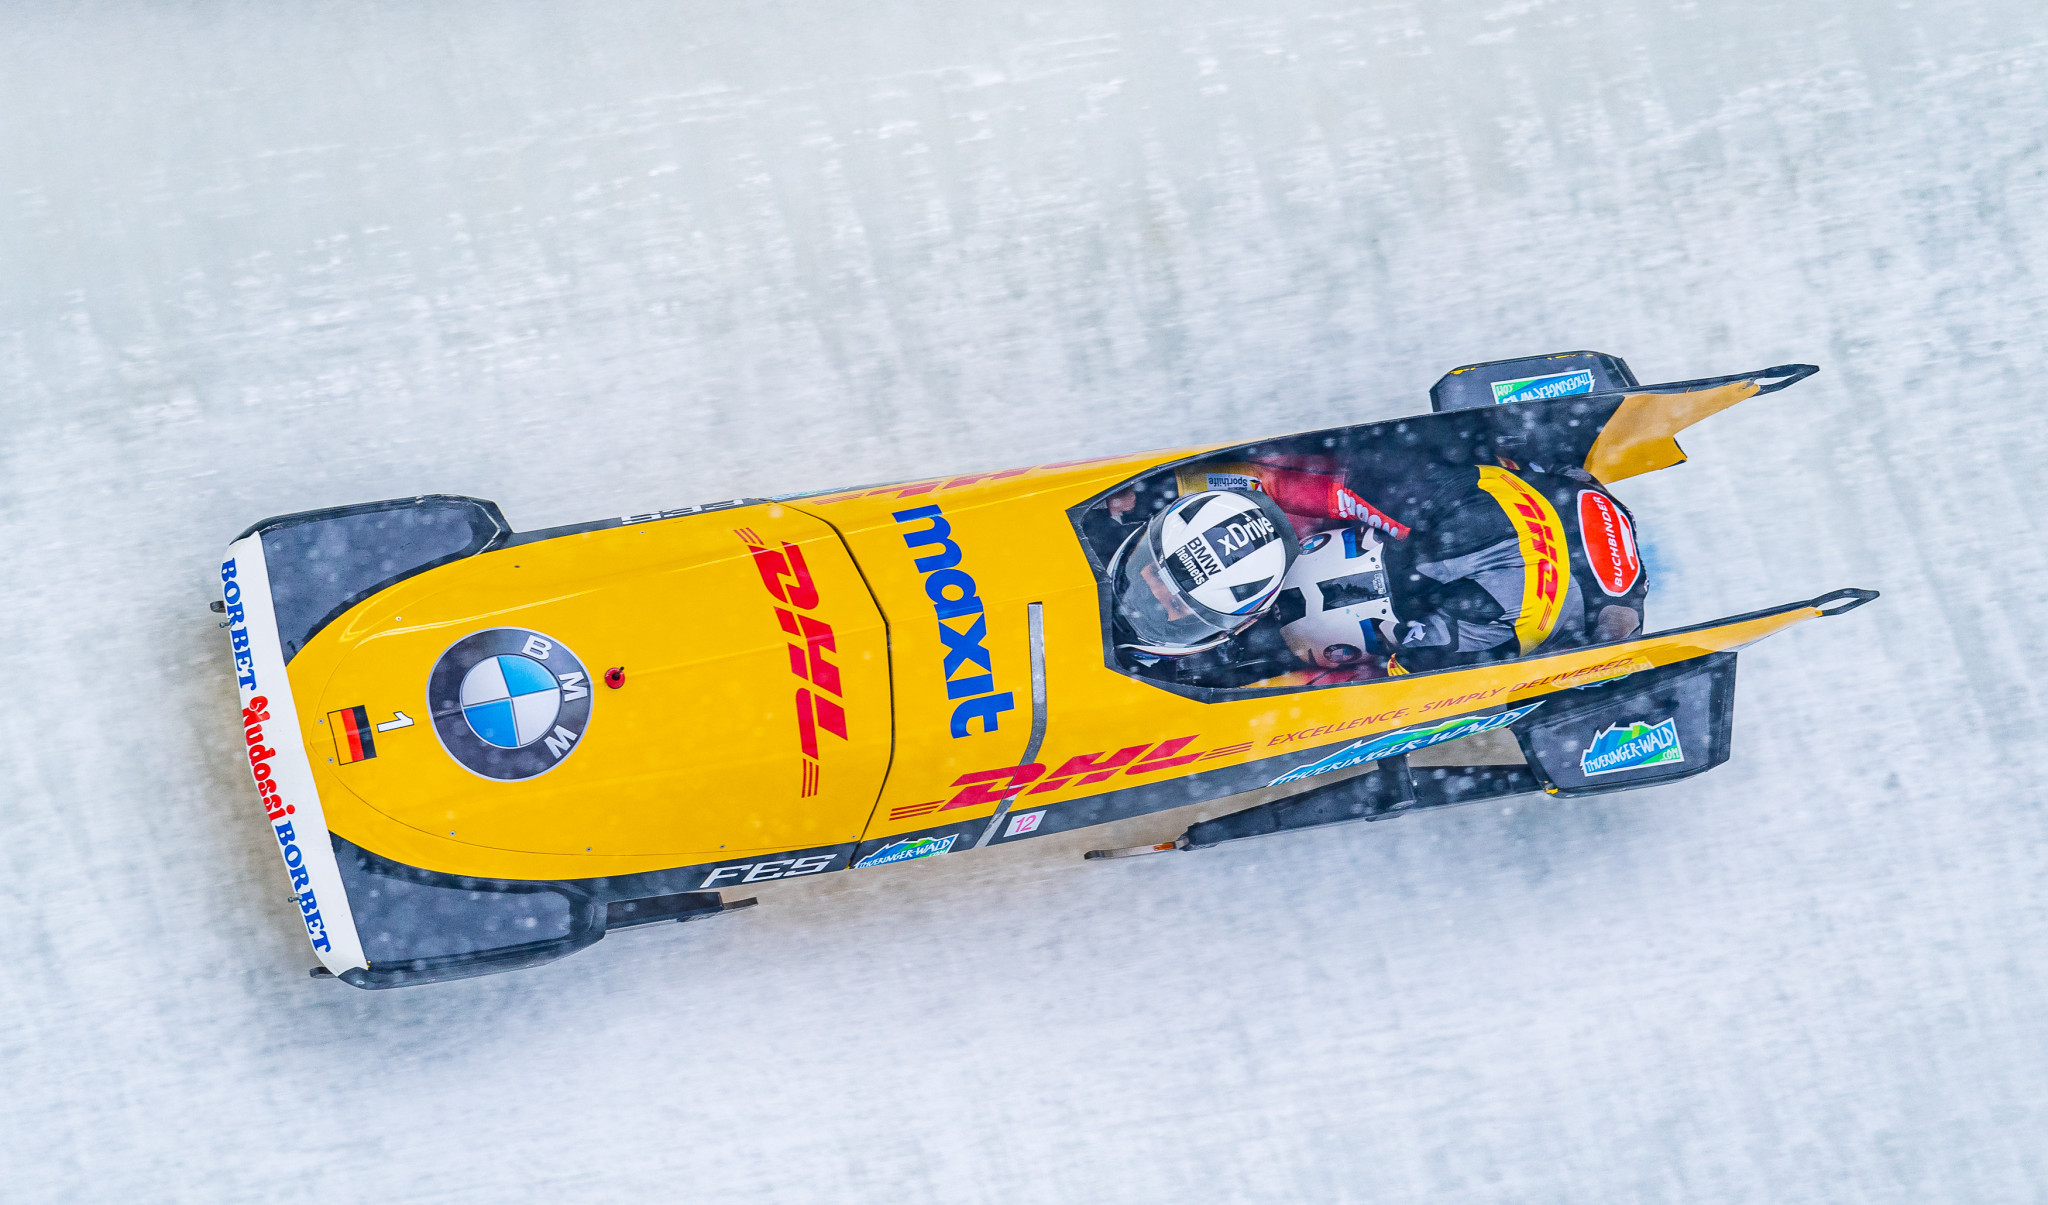 Germany's defending champion Mariama Jamanka is outside the podium positions at the halfway stage of the two-woman bob at the IBSF World Championships in Altenberg ©Getty Images